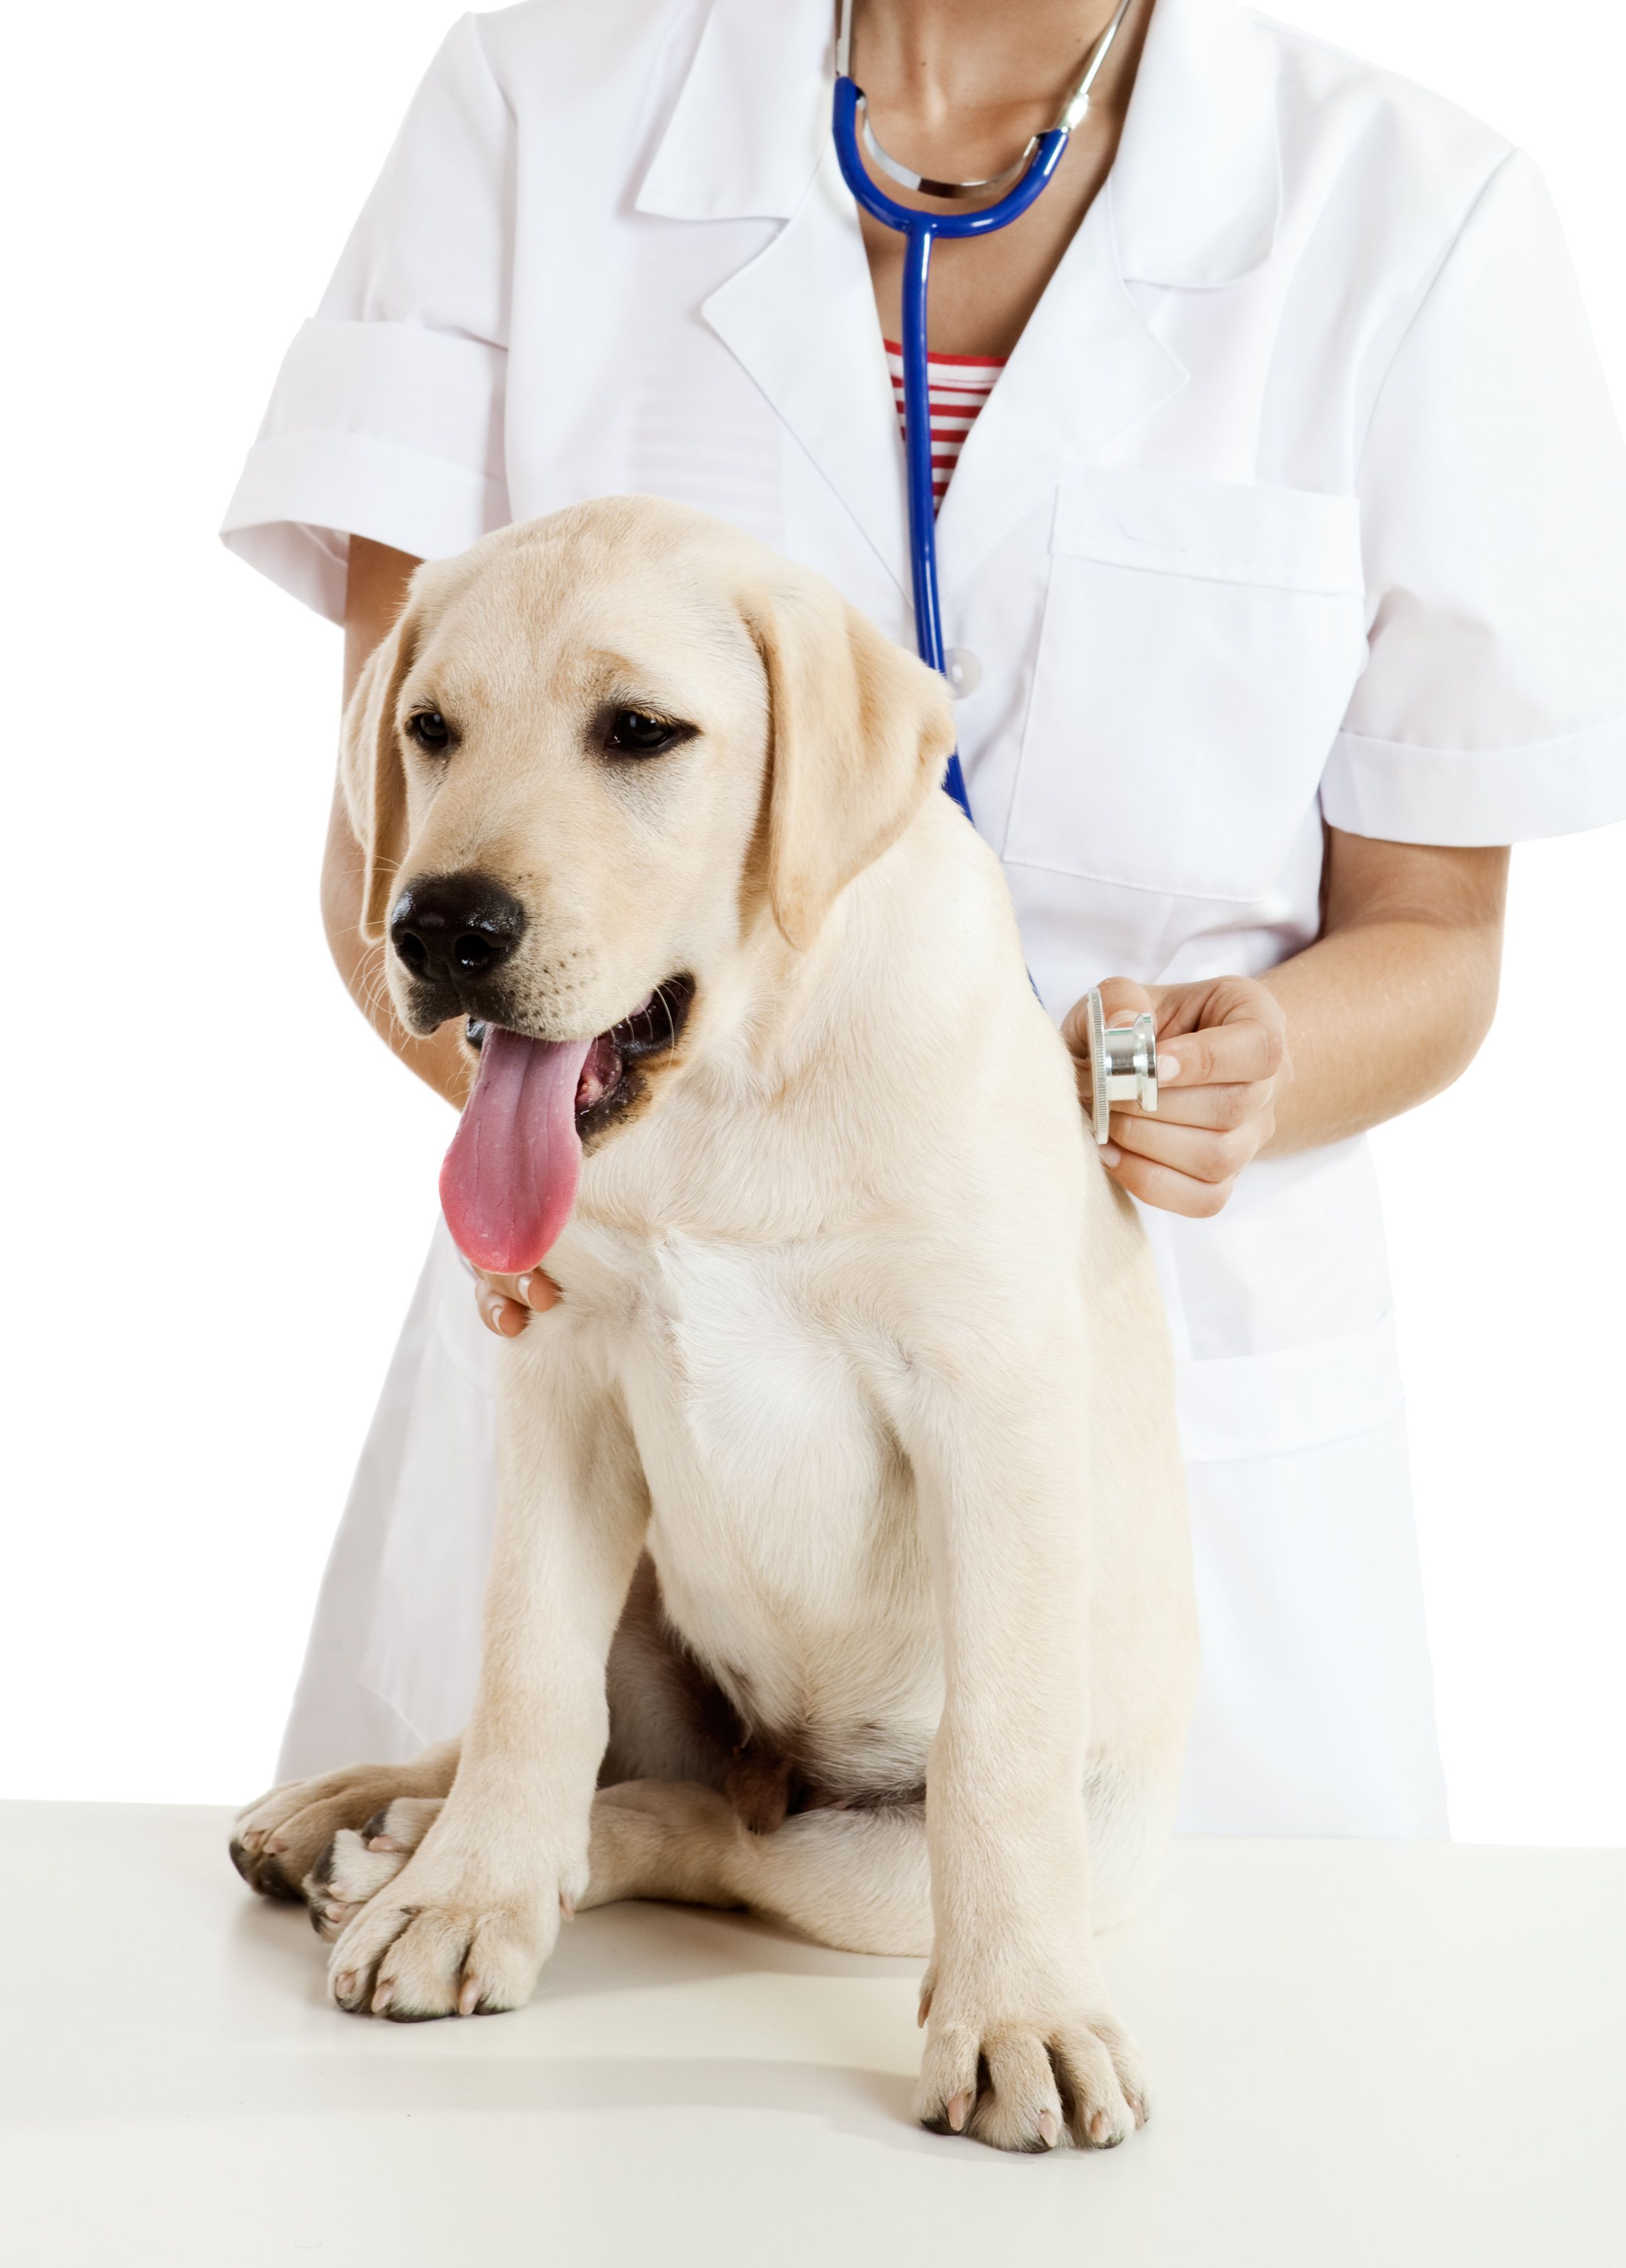 The Animal Hospital In Mckinley Park Can Ensure Pet Wellness